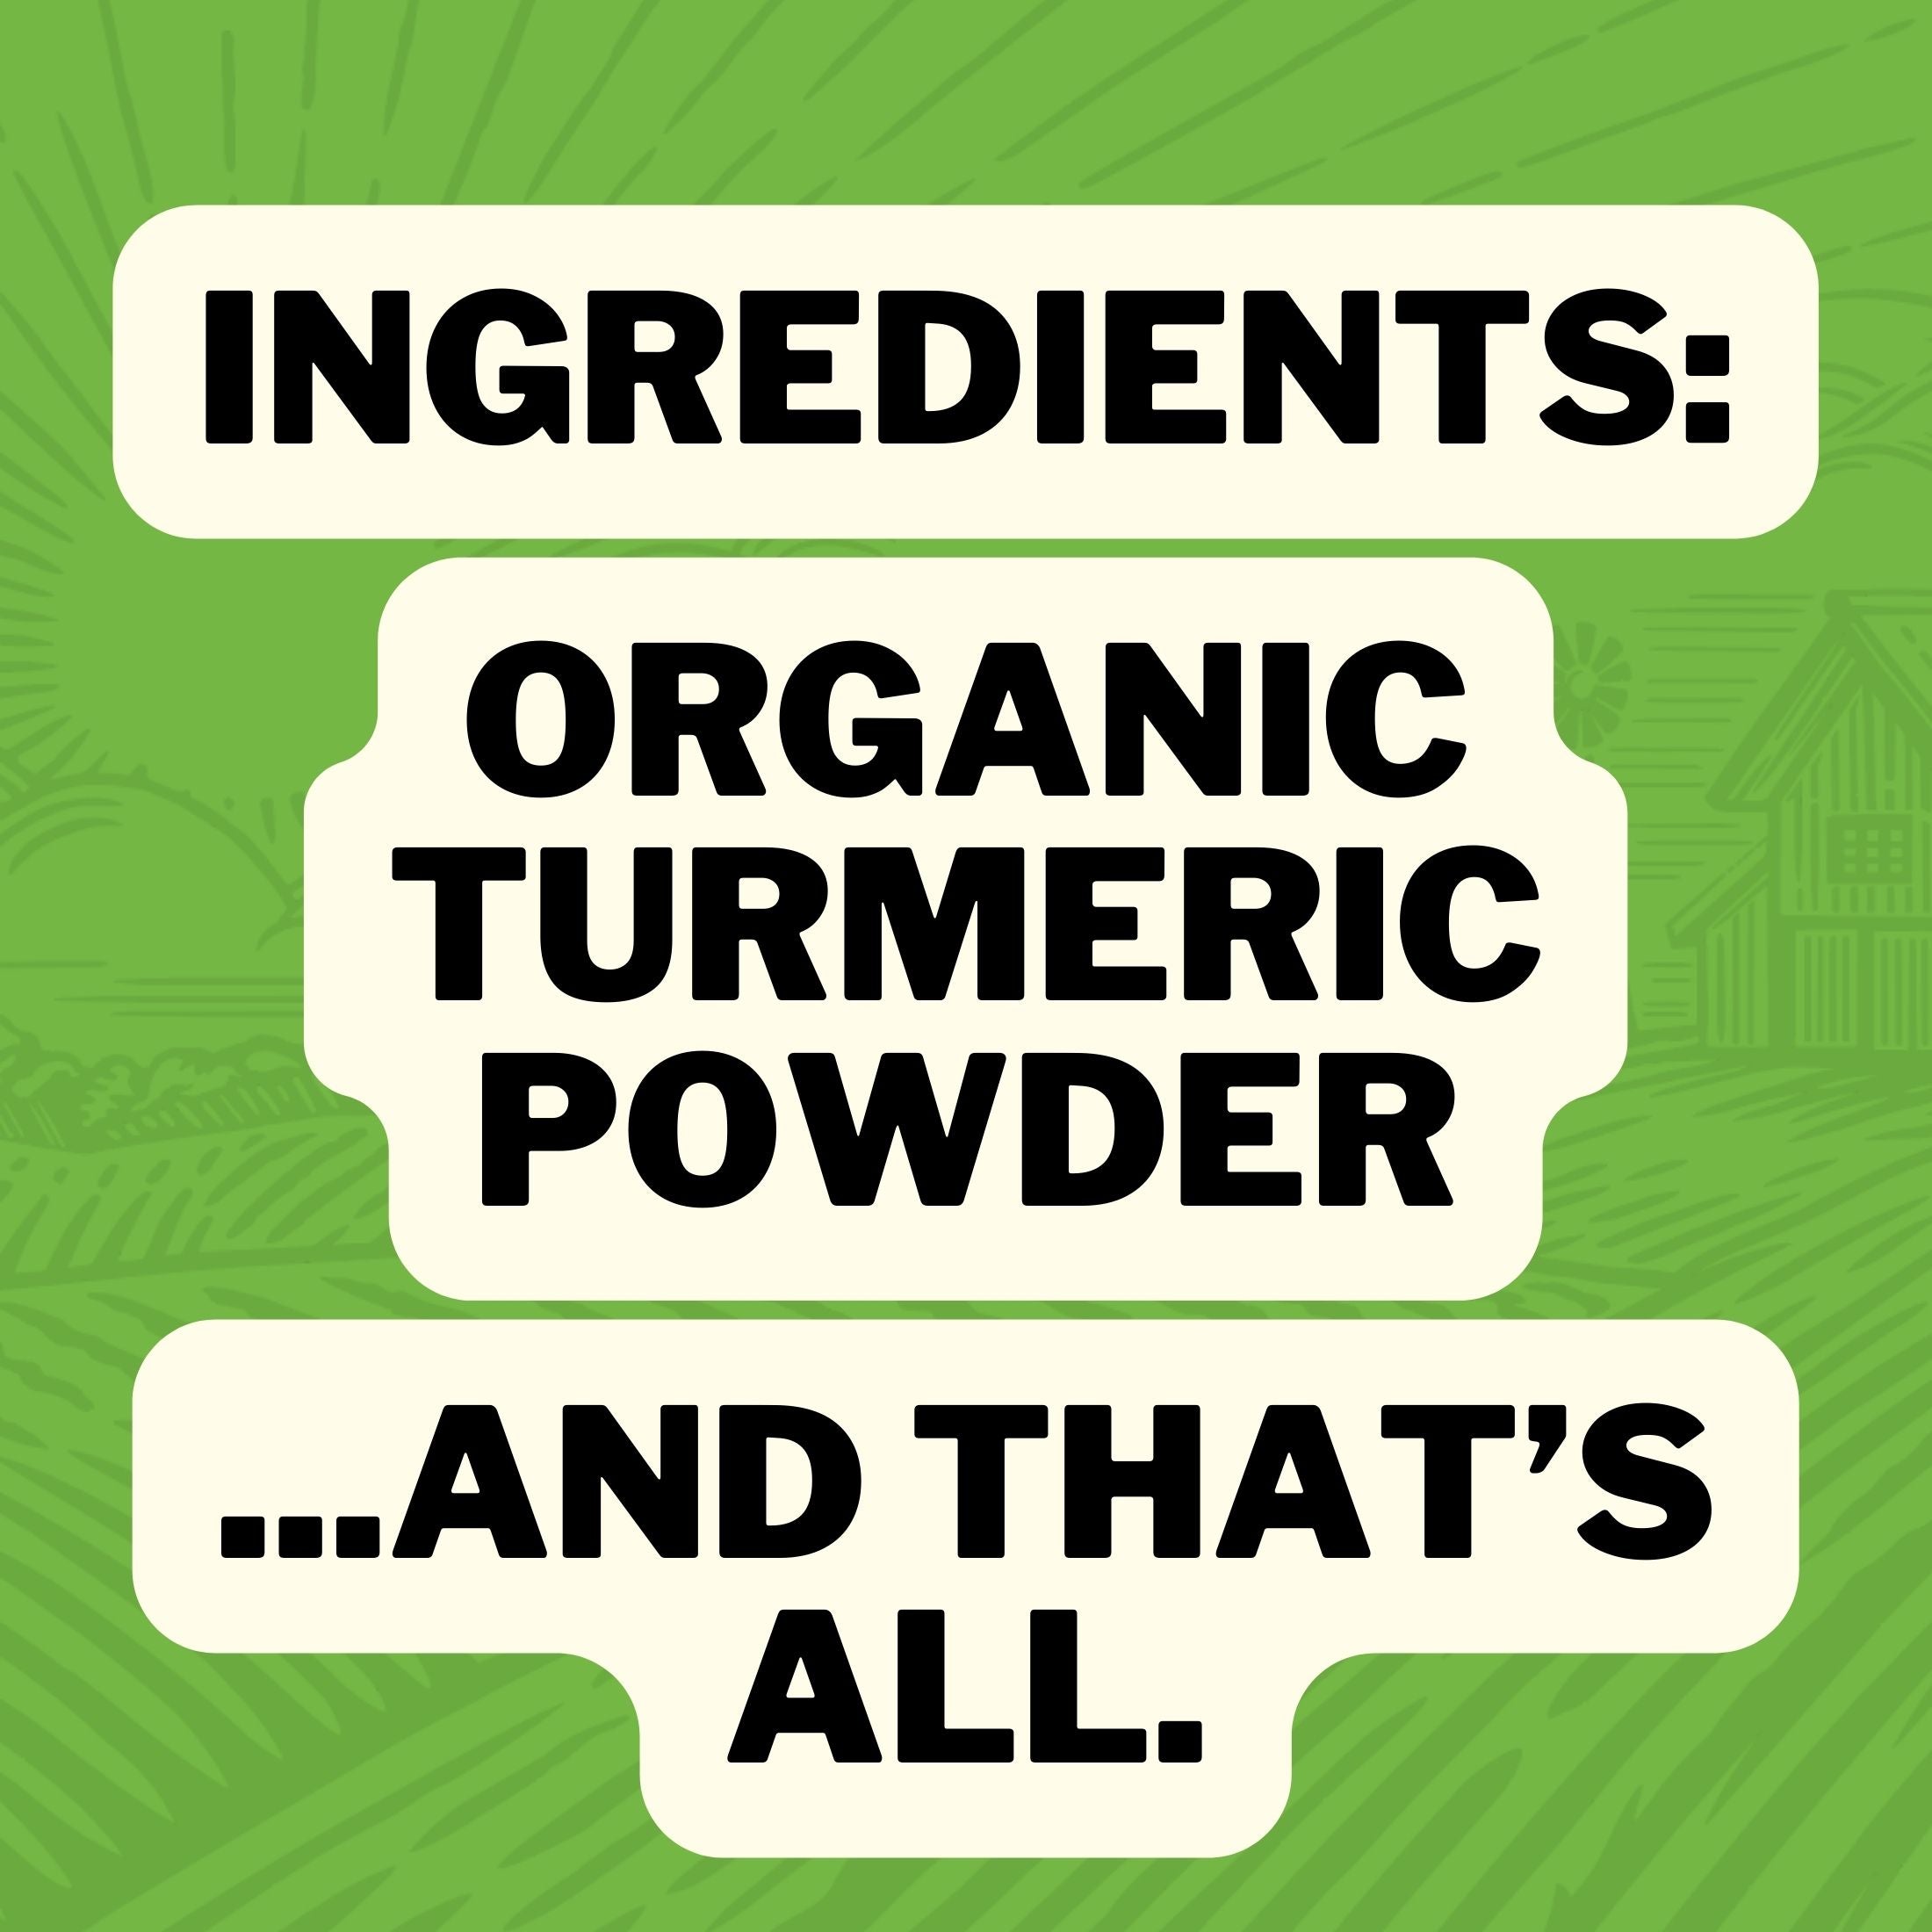 Ingredients : Organic Turmeric Powder ... and that's all.